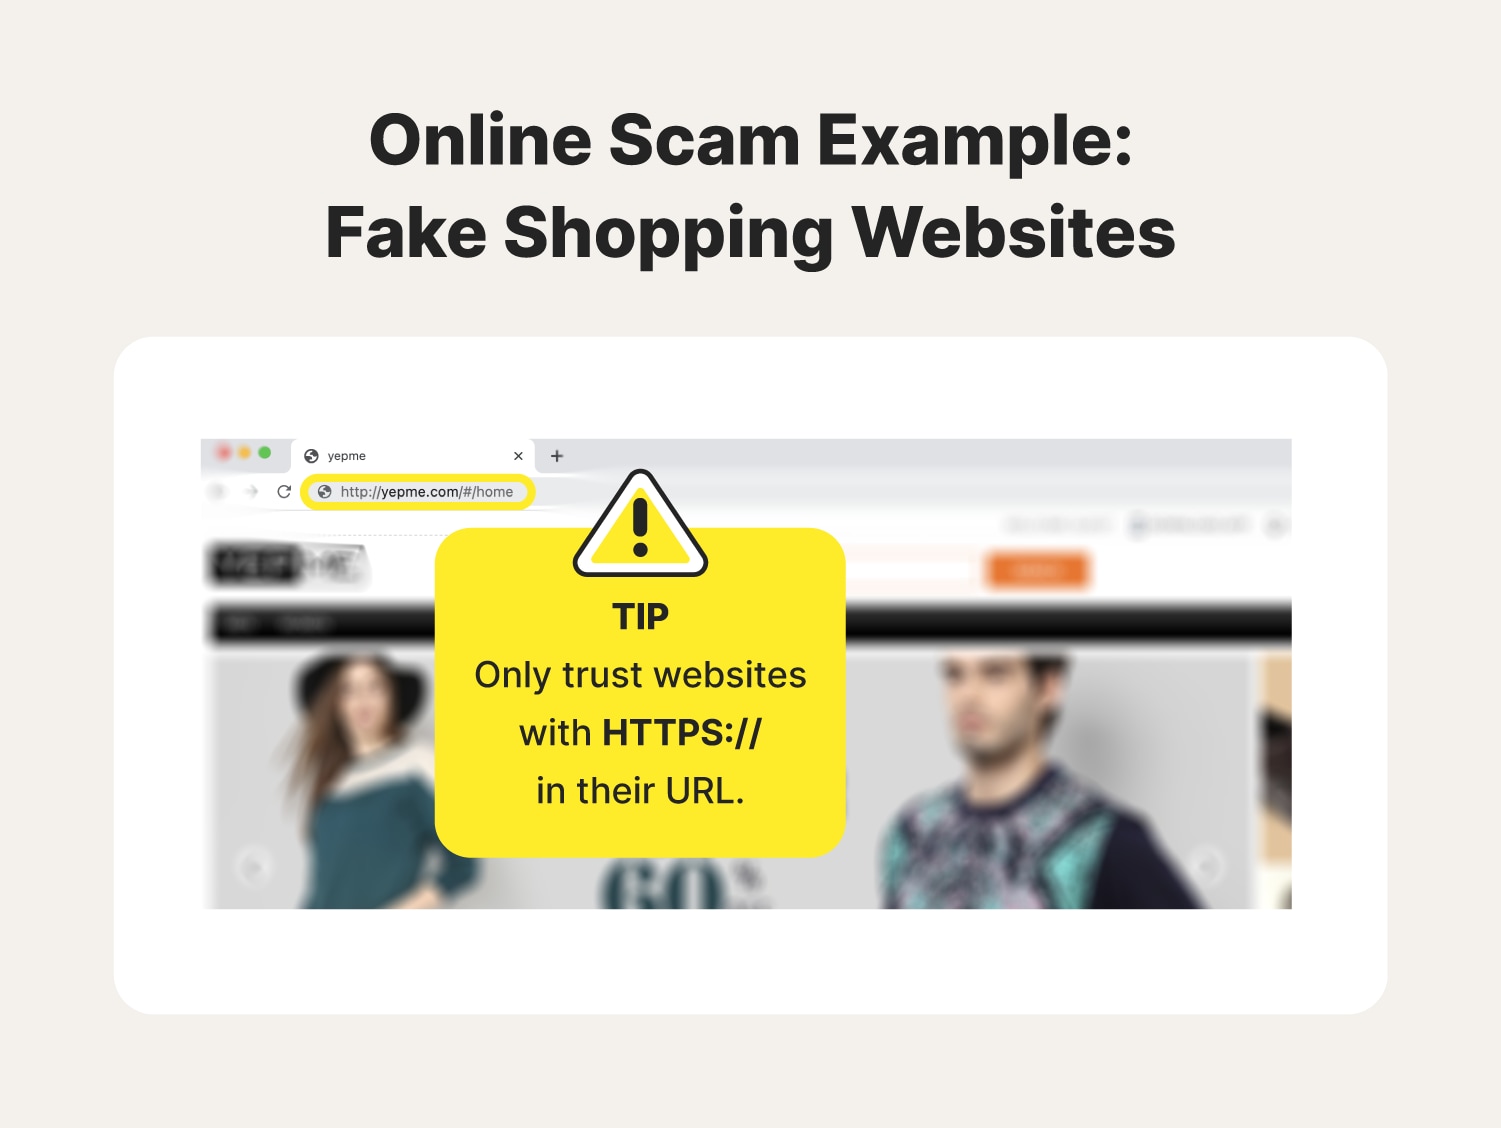 An example of an untrustworthy website acts as an example of what popular online scams look like. 